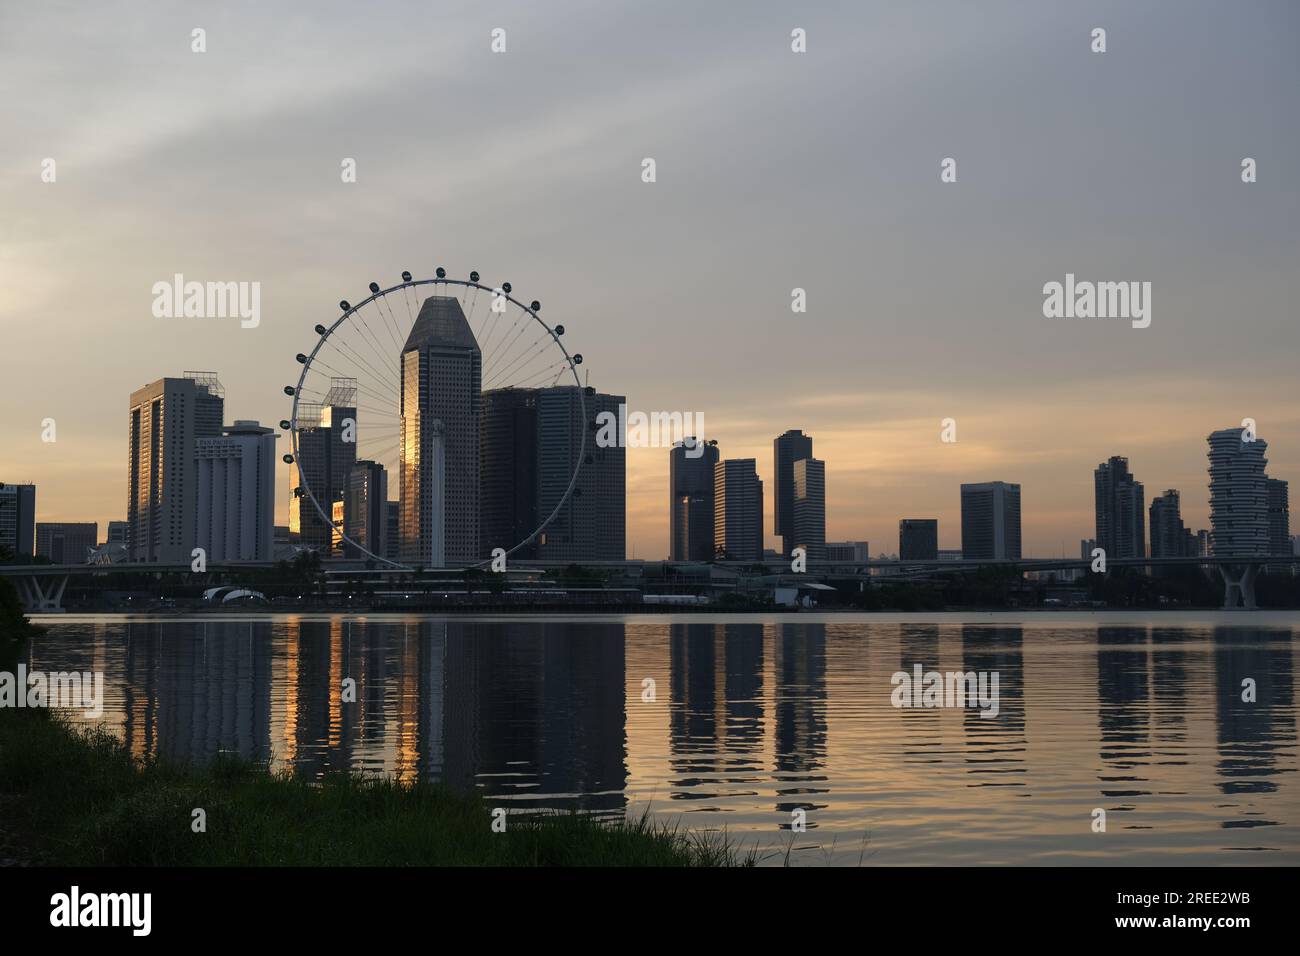 Singapore business district skyline at dusk Stock Photo